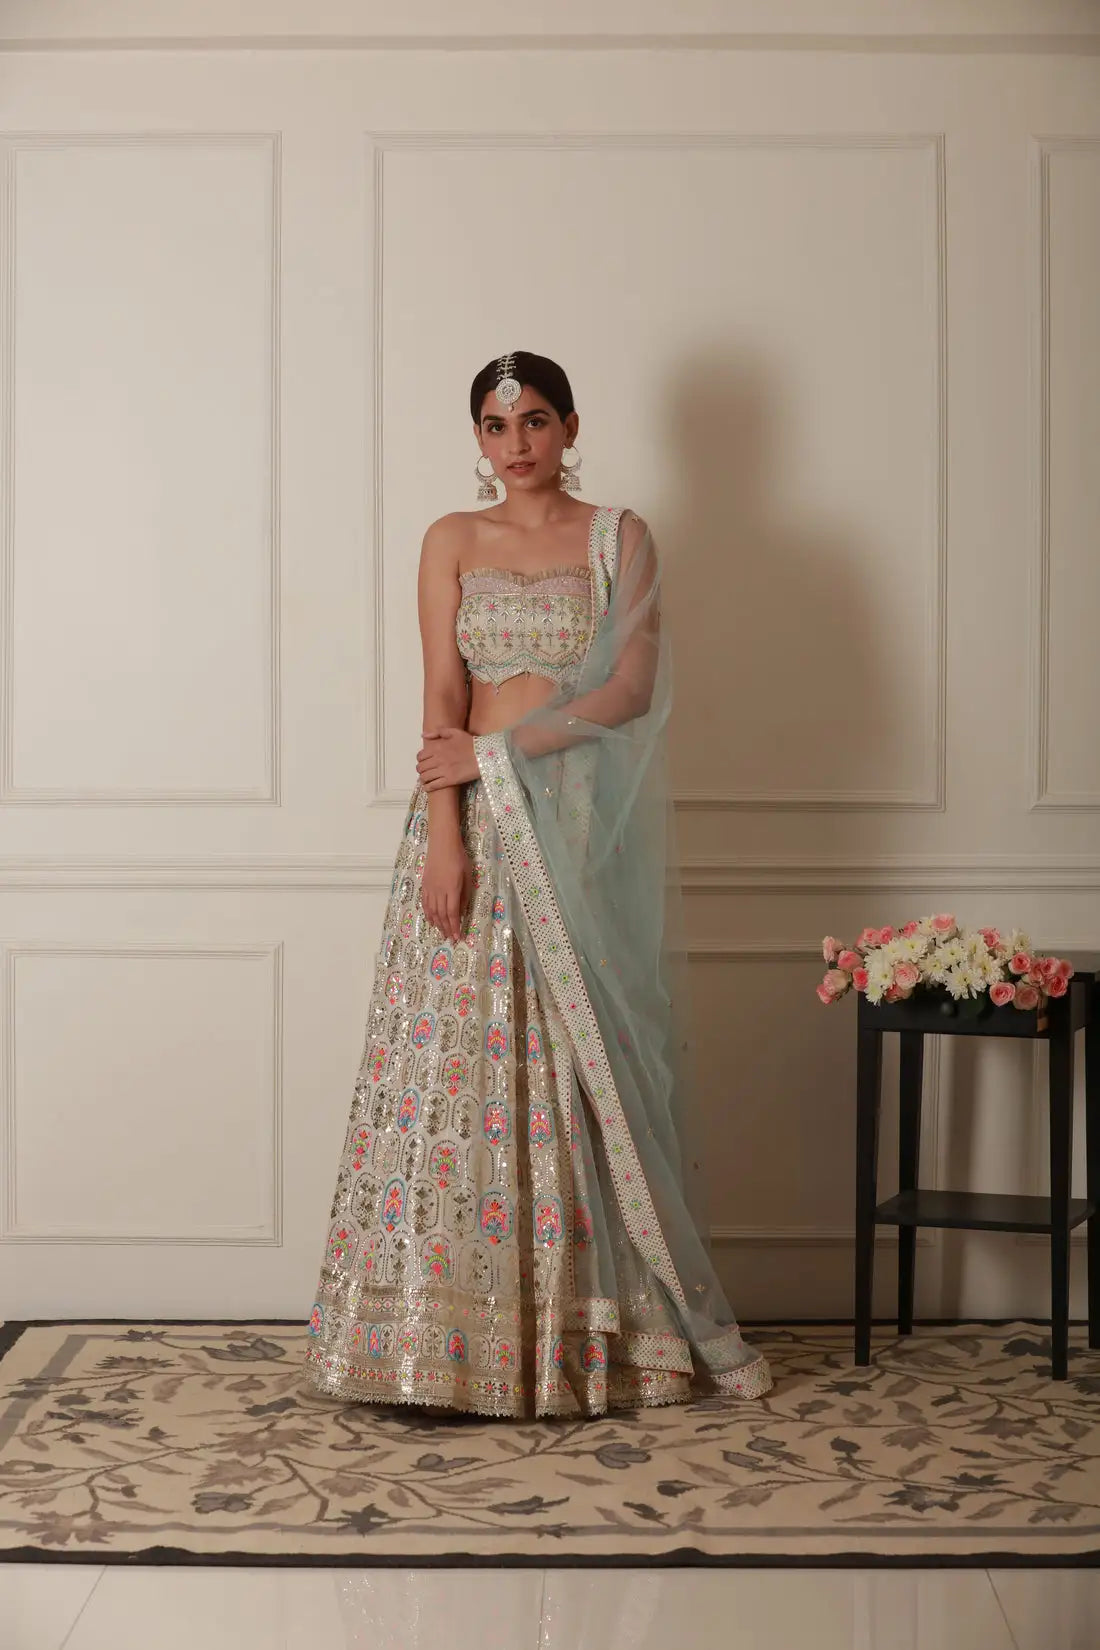 Types Of Lehenga Skirts & How To Choose According To Your Body Type |  Indian fashion trends, Indian fashion, Indian designer outfits